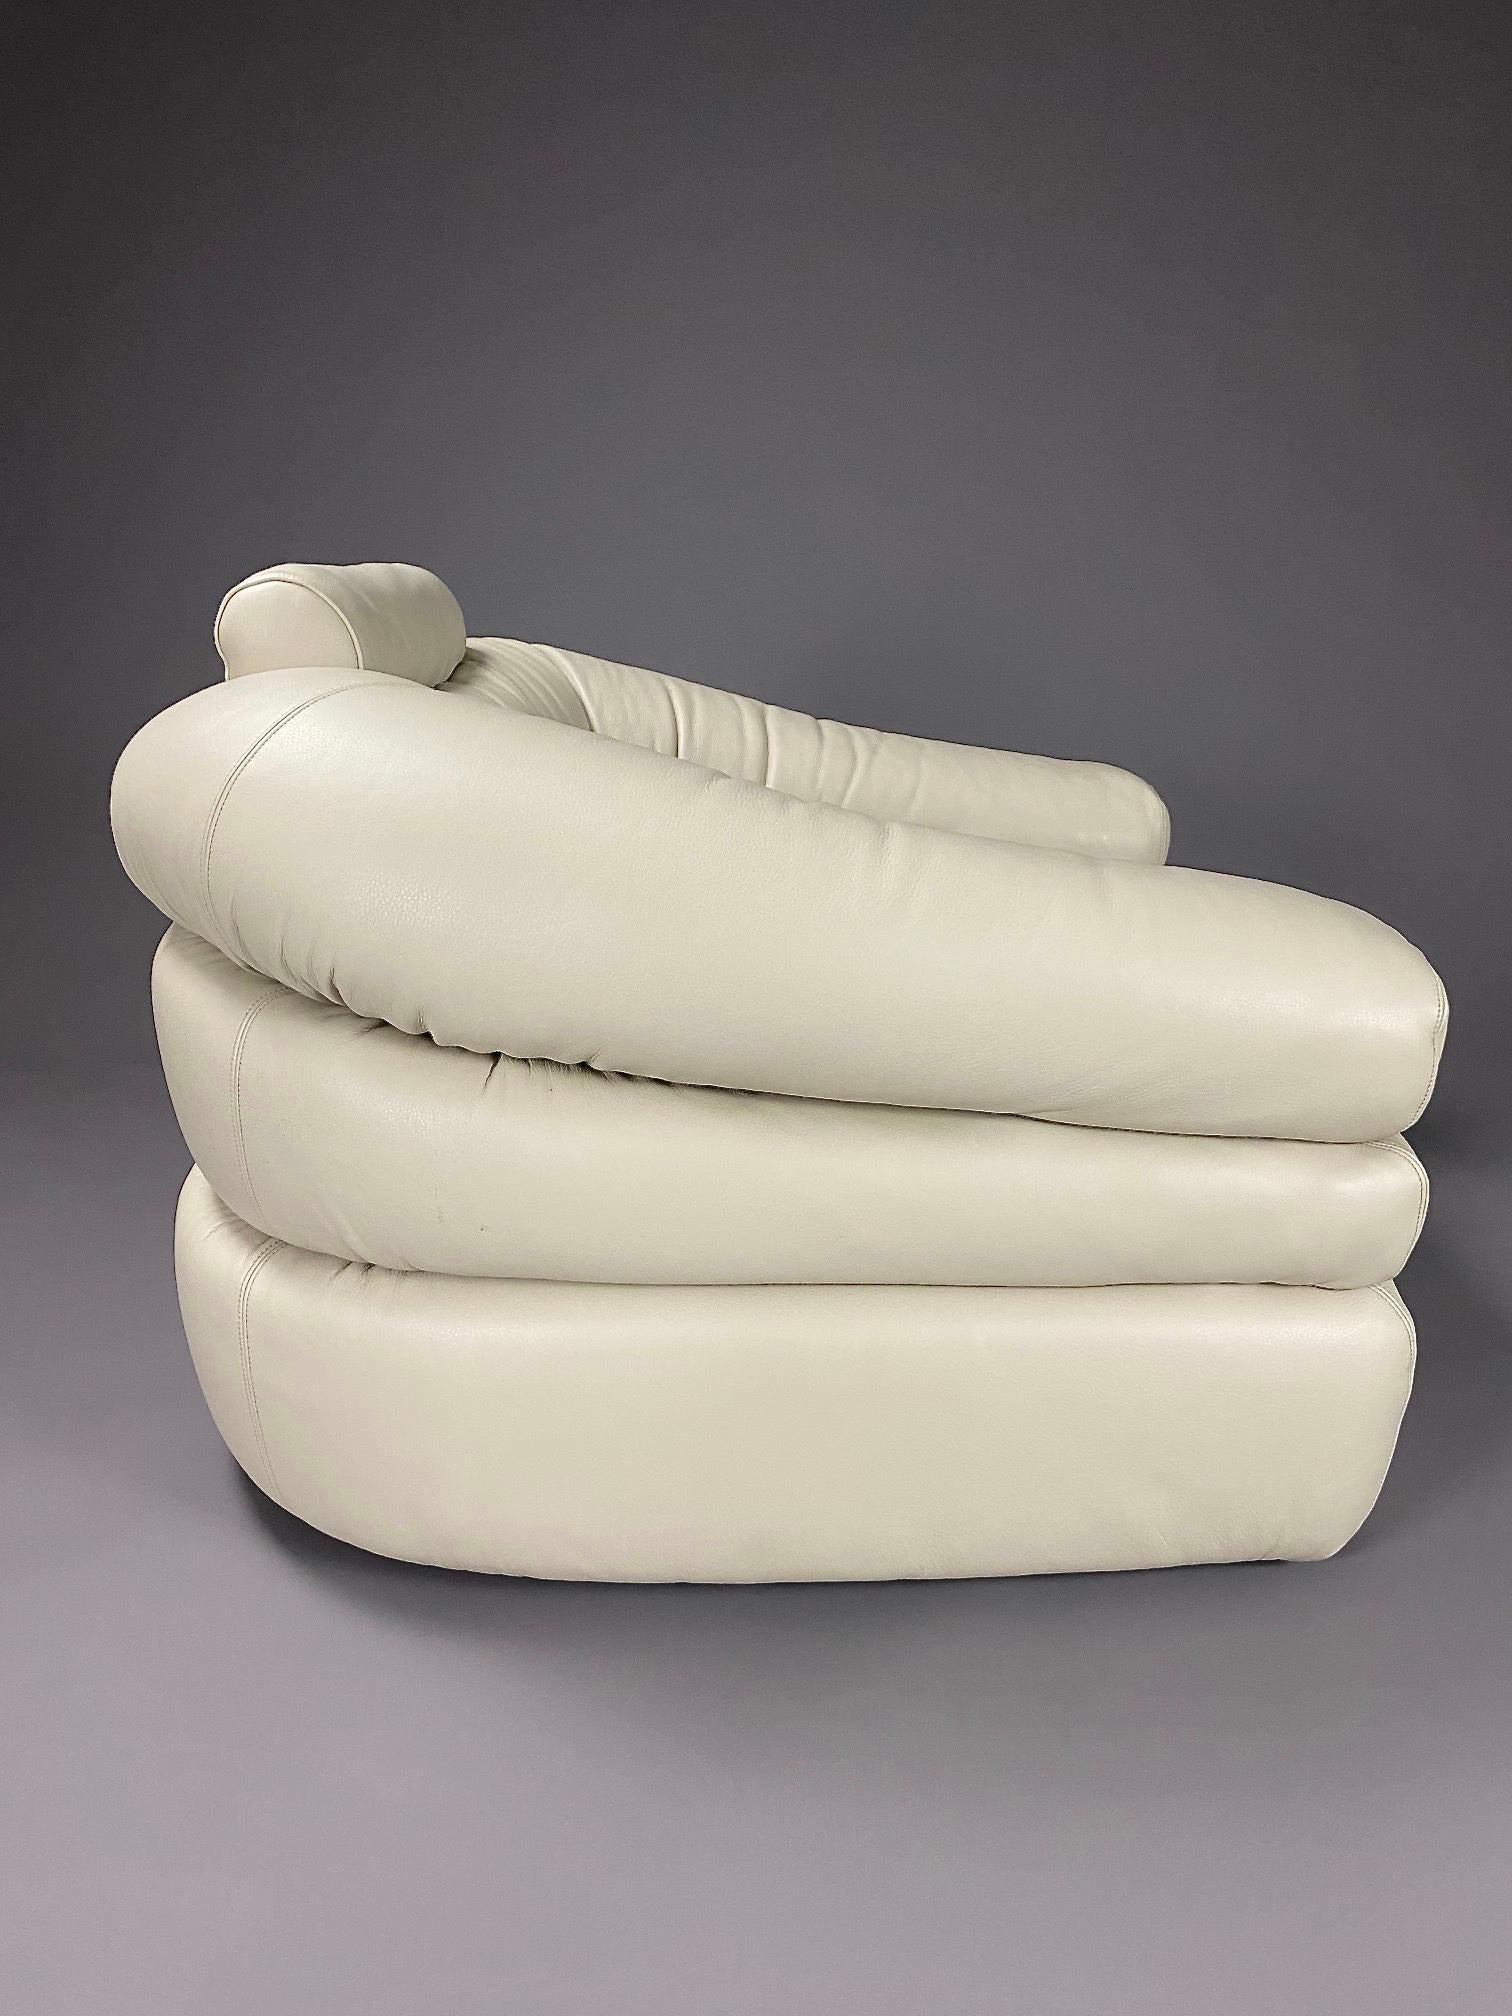 Mid-20th Century Ivory Leather Mid-Century Modern Straccio Lounge Chair by Zanotta, Italy For Sale